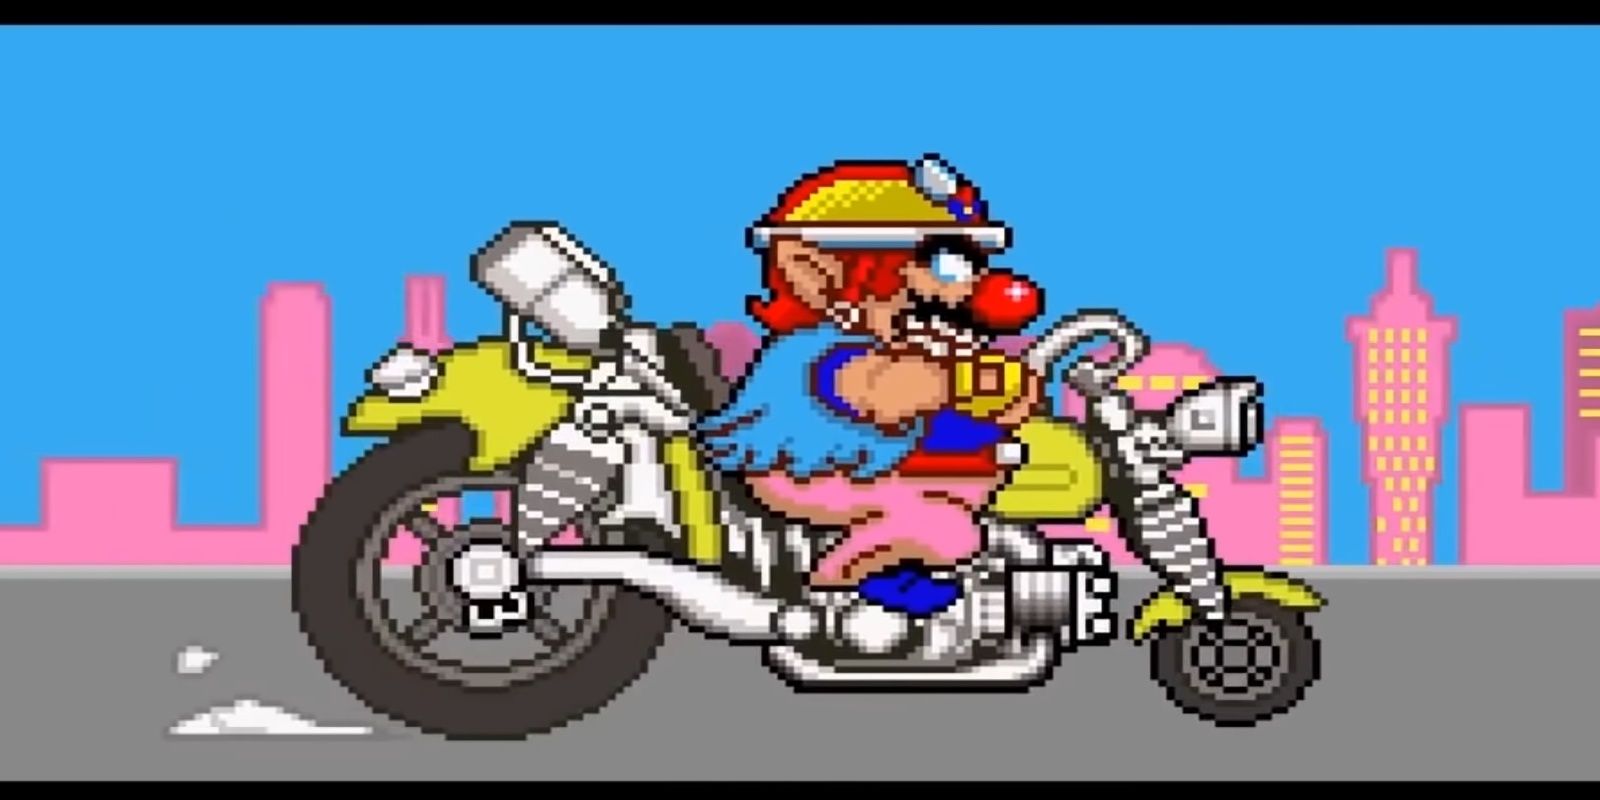 Wario in his now signature bike and jacket from the very first WarioWare game.